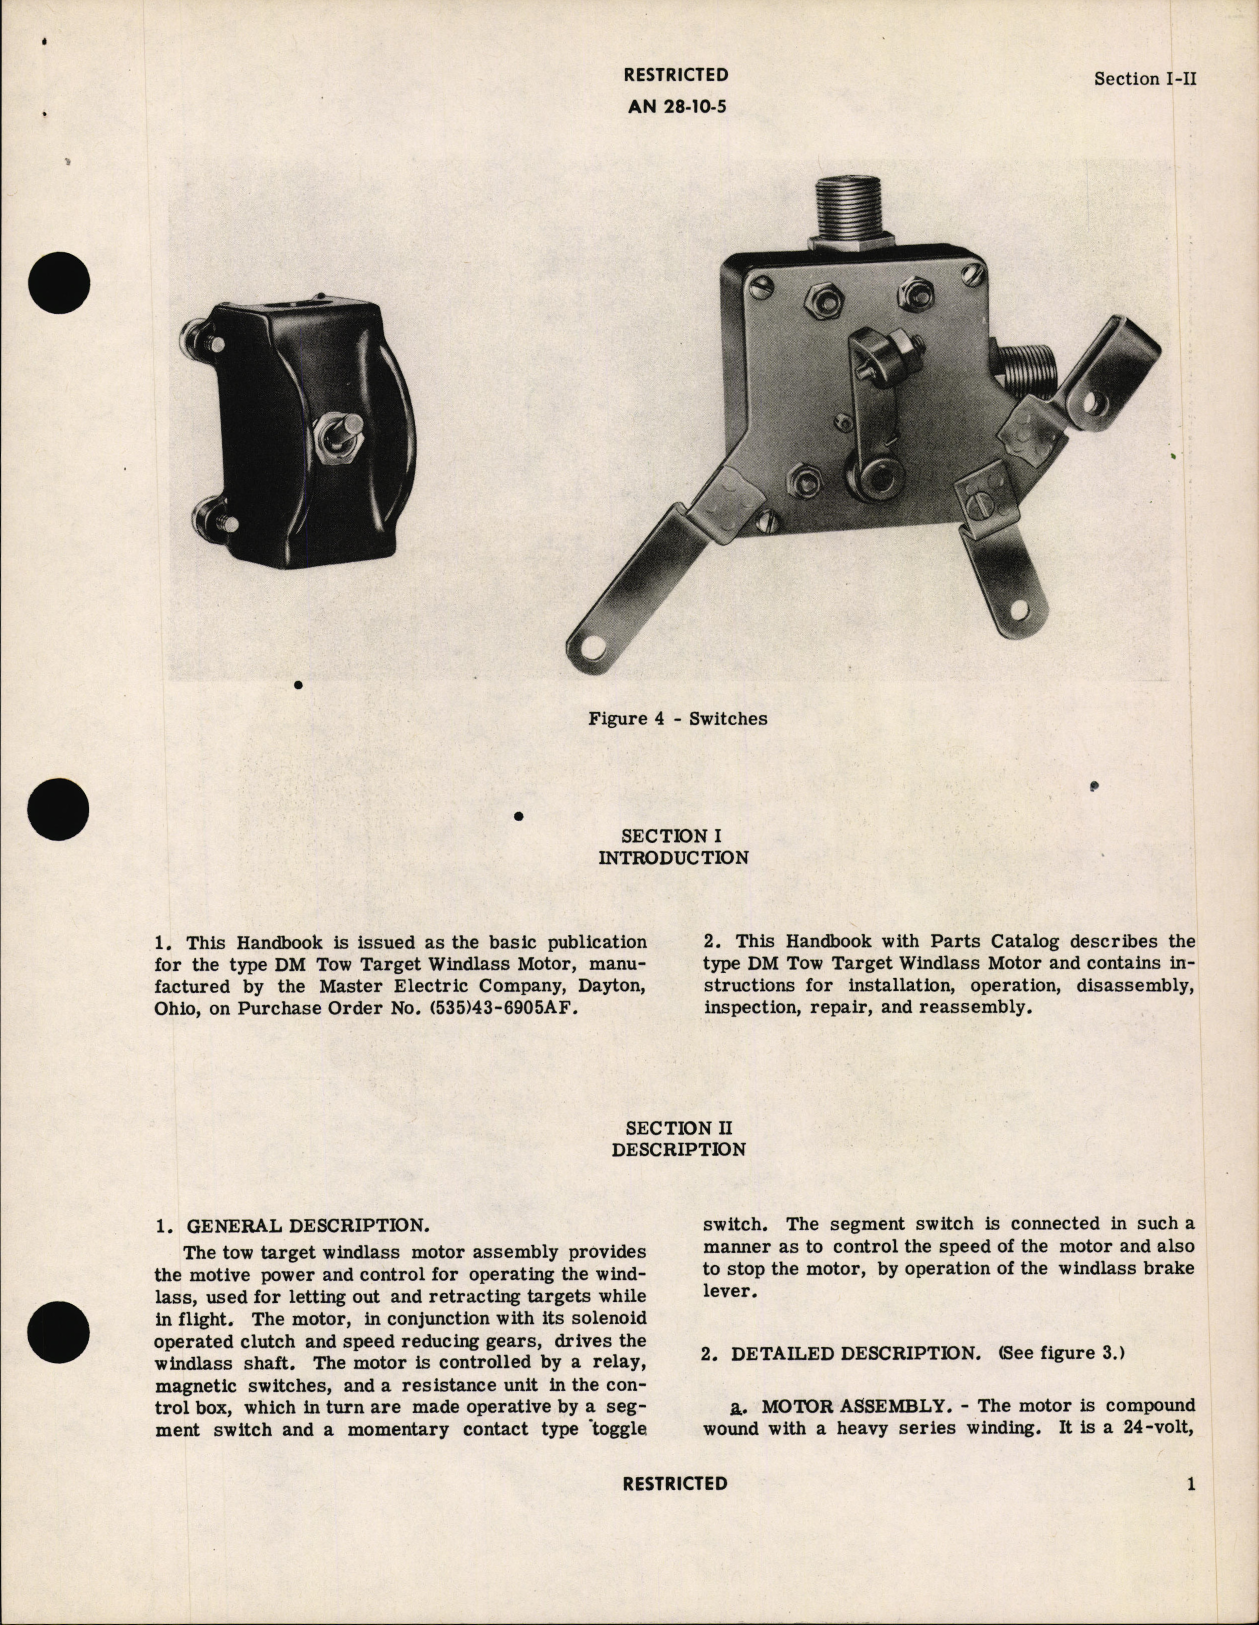 Sample page 7 from AirCorps Library document: Handbook of Instructions with Parts Catalog for Tow Target Windlass Motor Type DM